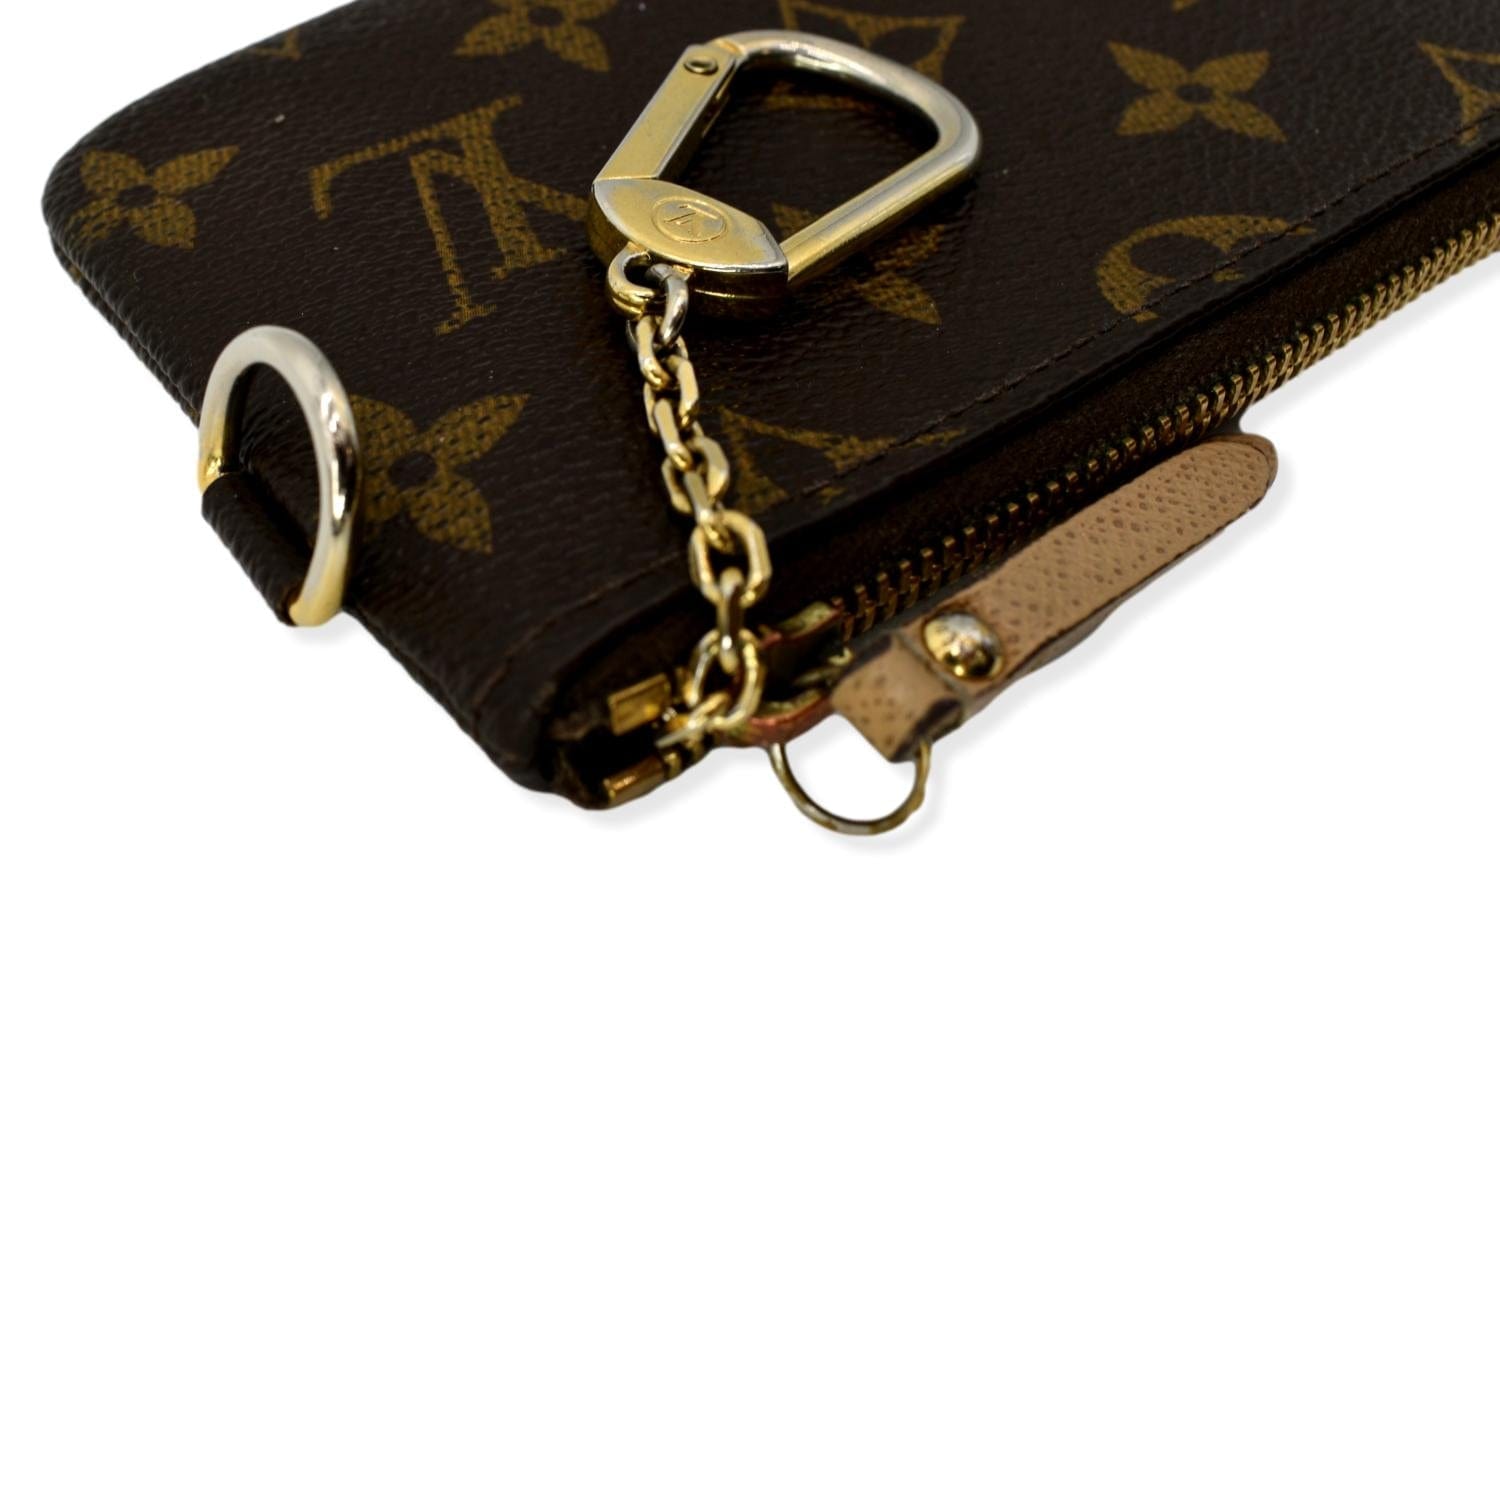 Louis Vuitton Limited Edition Monogram Canvas Complice Trunks & Bags Cles  Key and Change Holder - Yoogi's Closet